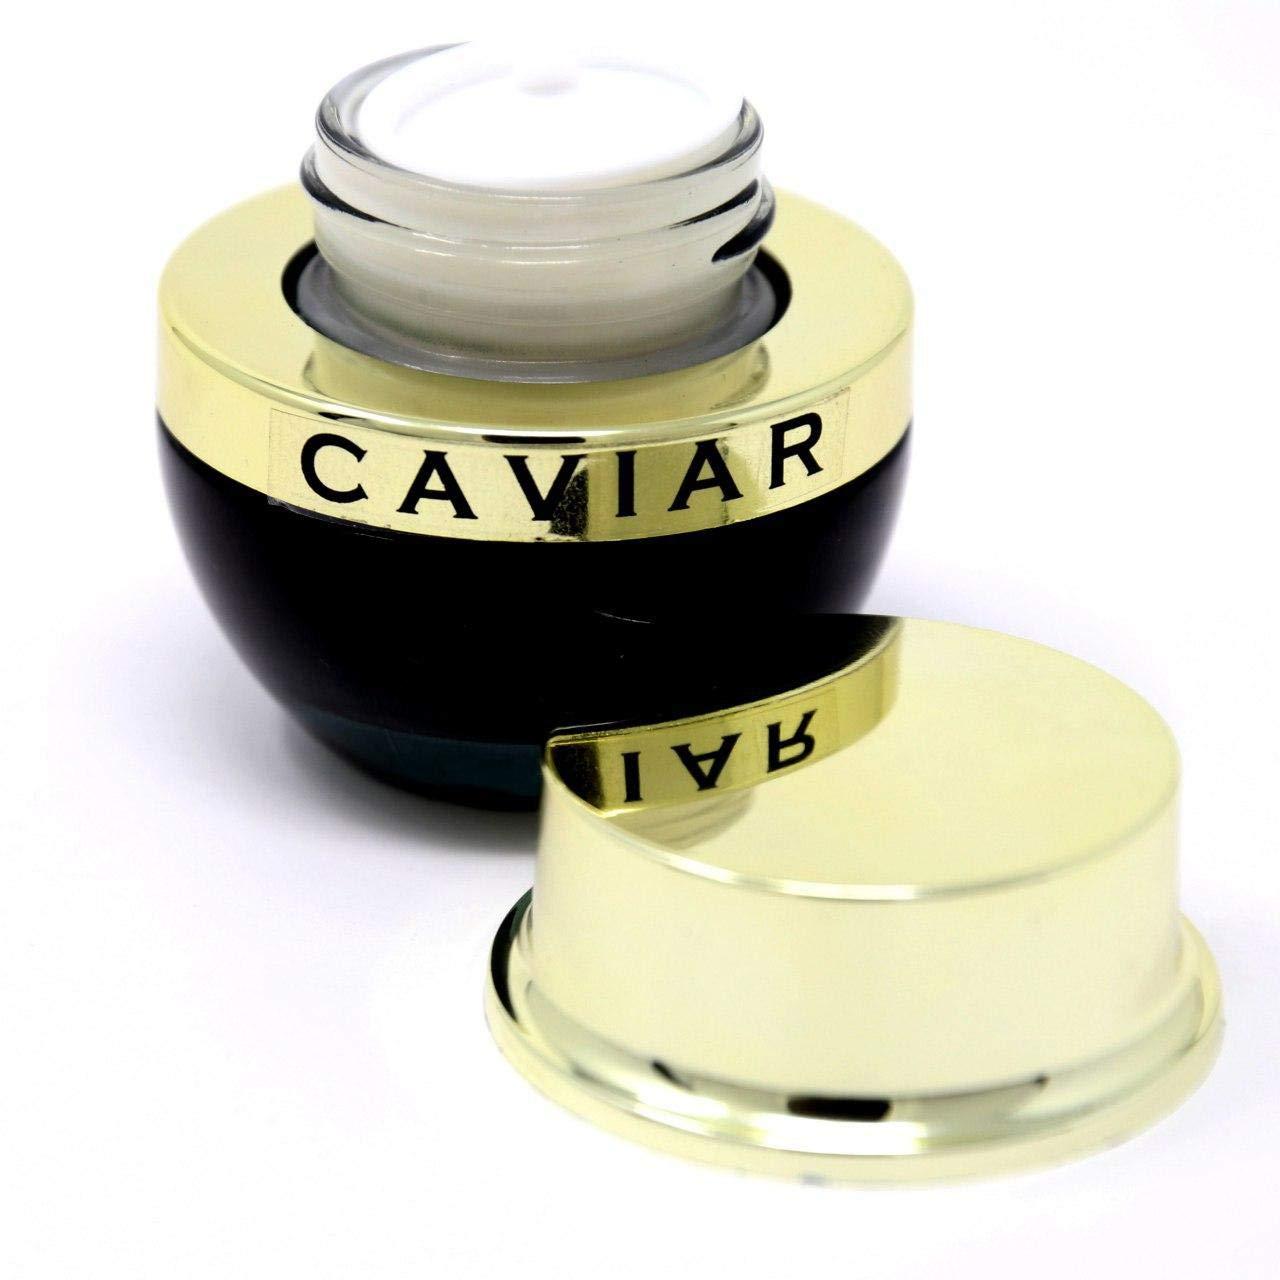  Caviar Natural Leather Conditioner Restorer Cream for Designer  Handbags, Purses, Shoes, Luggage, Bags, and Luxury Goods, Deep Conditioning  Repair, Made in the USA, 30 mL : Clothing, Shoes & Jewelry